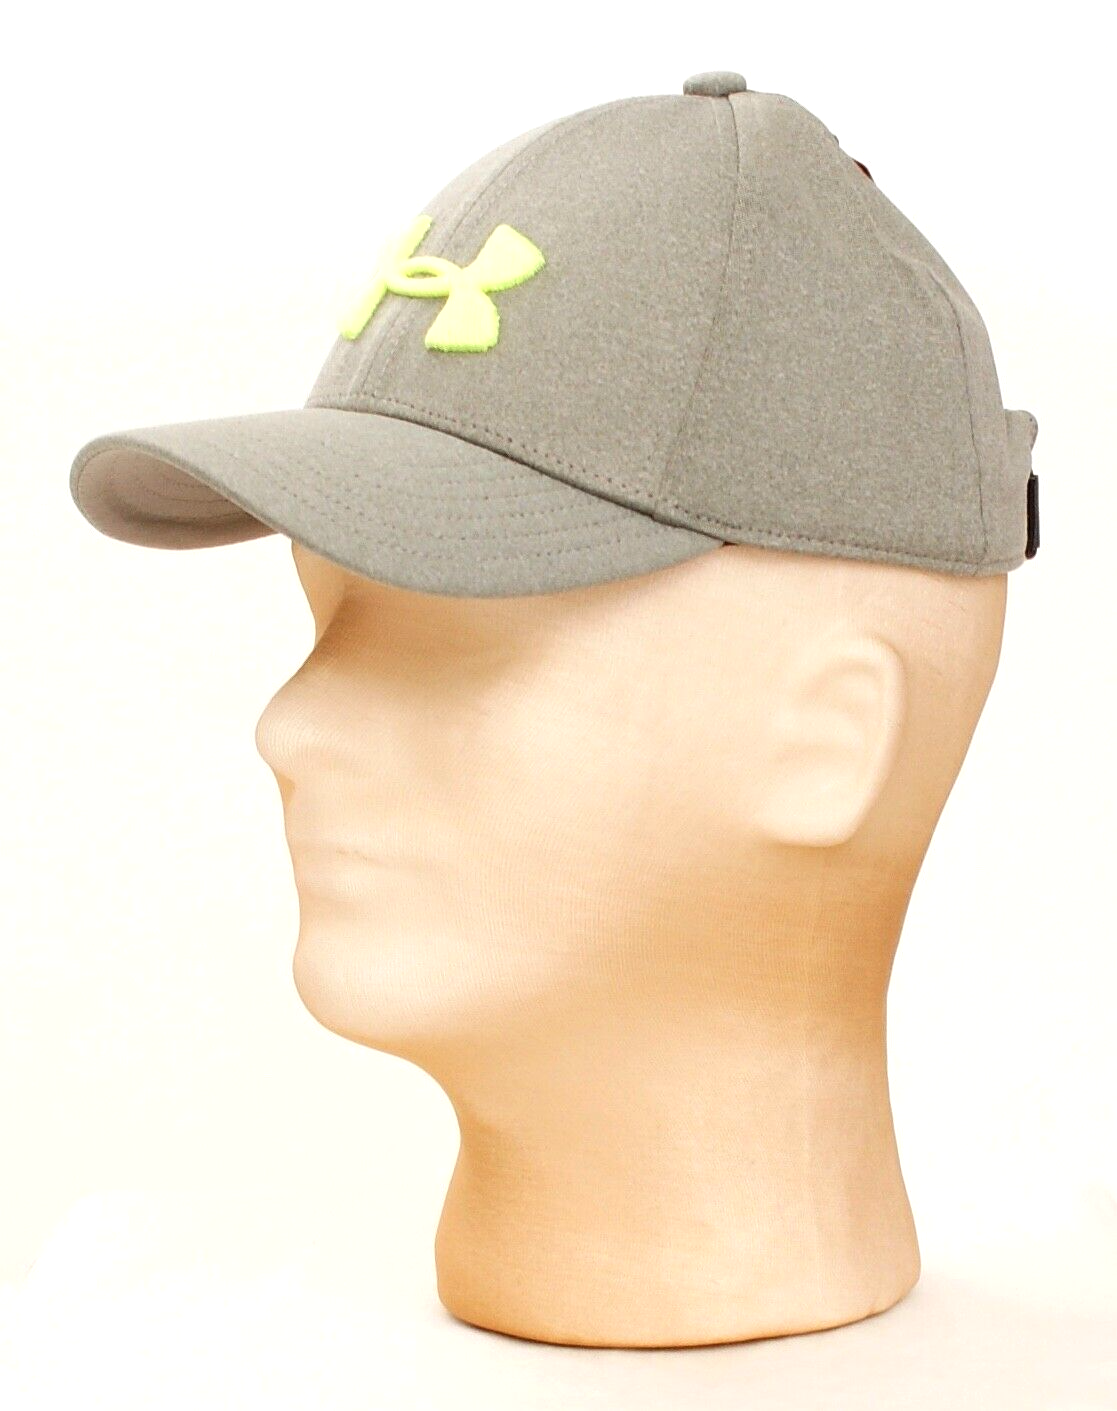 Primary image for Under Armour Green UA Armour Twist Cap Youth Boy's Adjustable One Size NWT